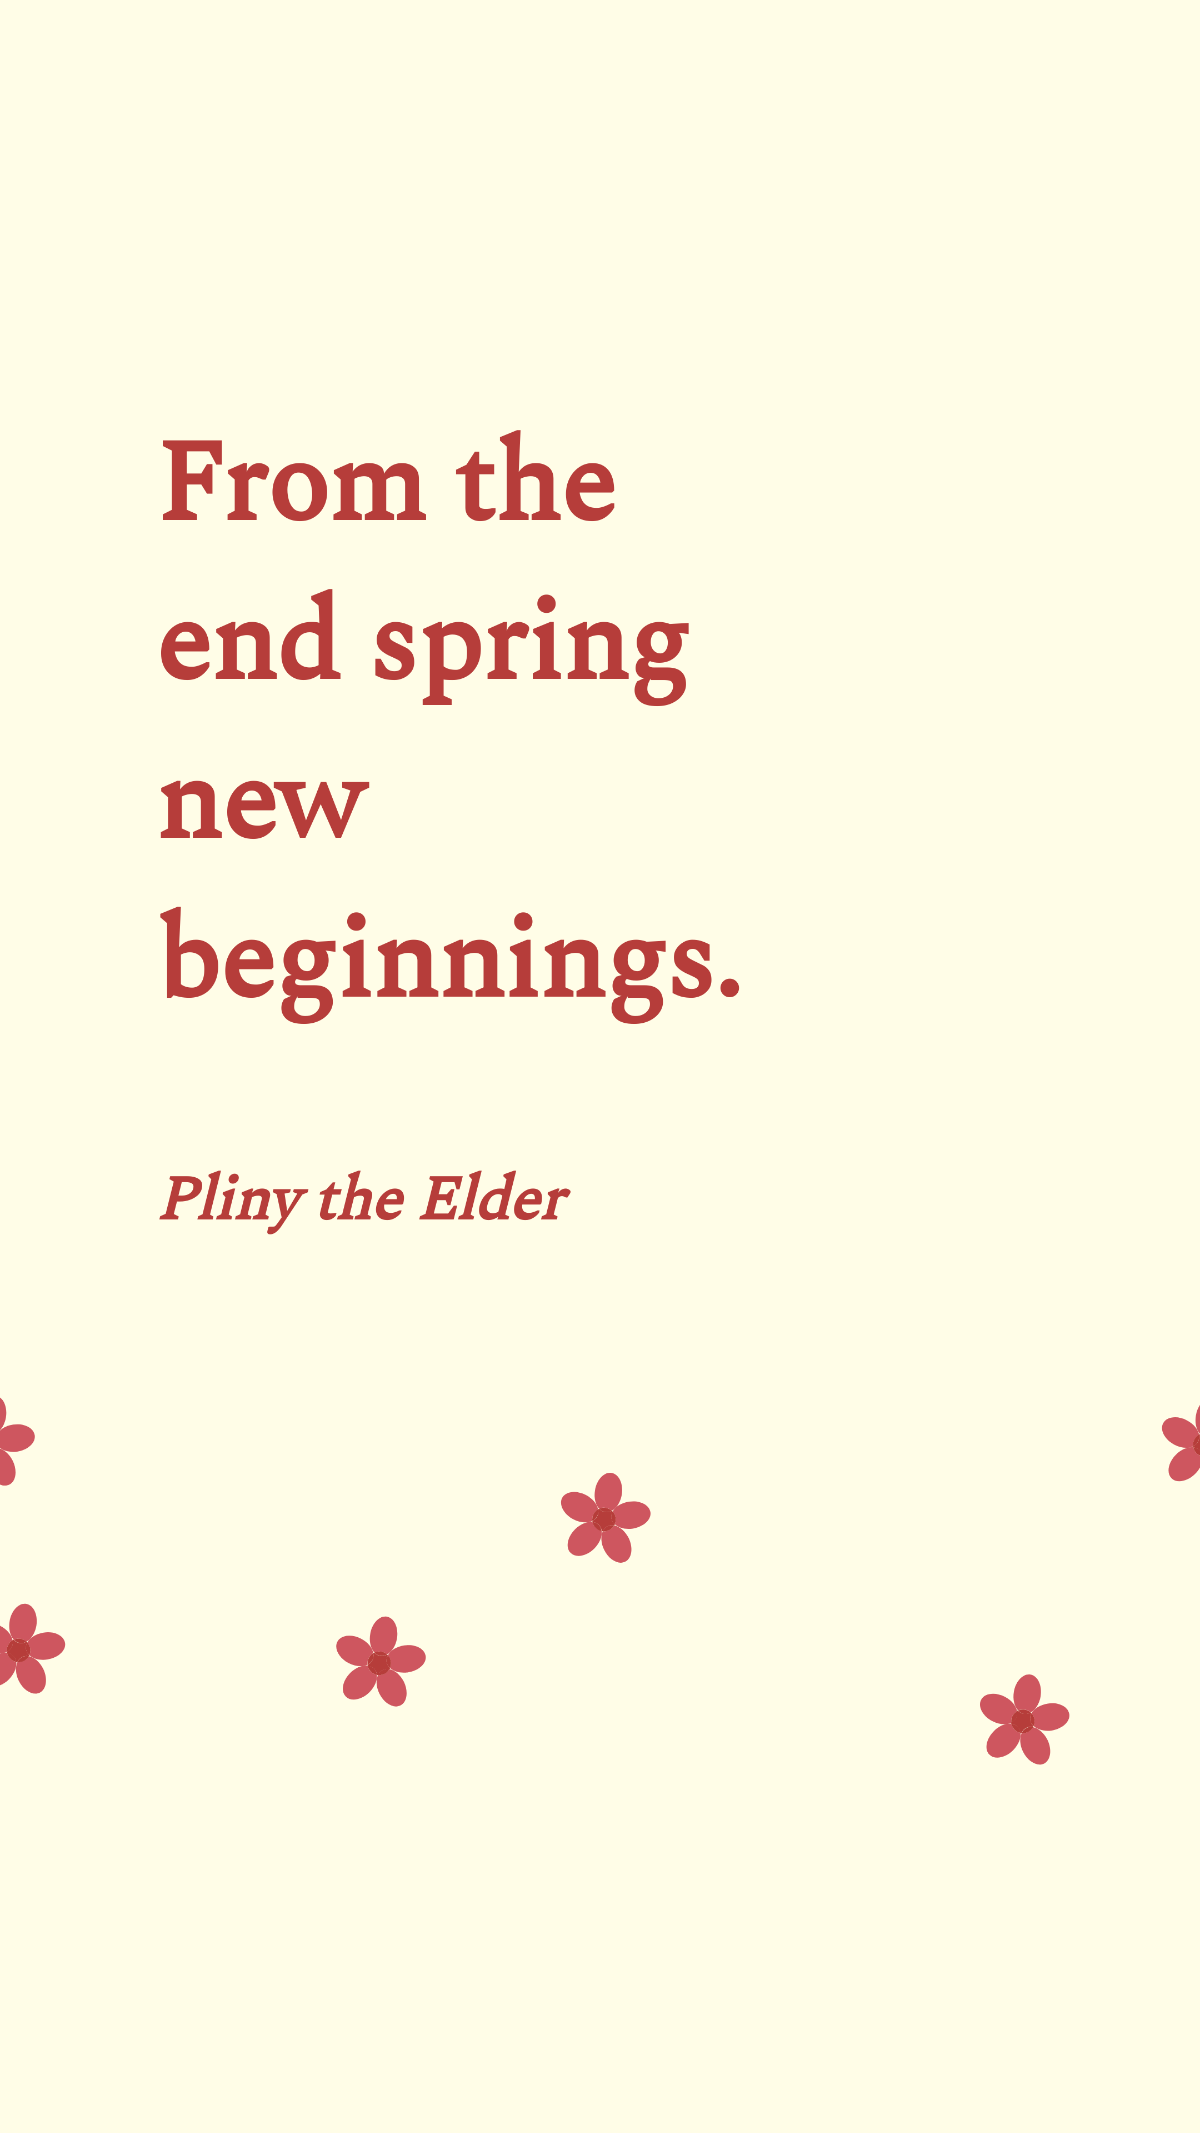 Pliny the Elder - From the end spring new beginnings.